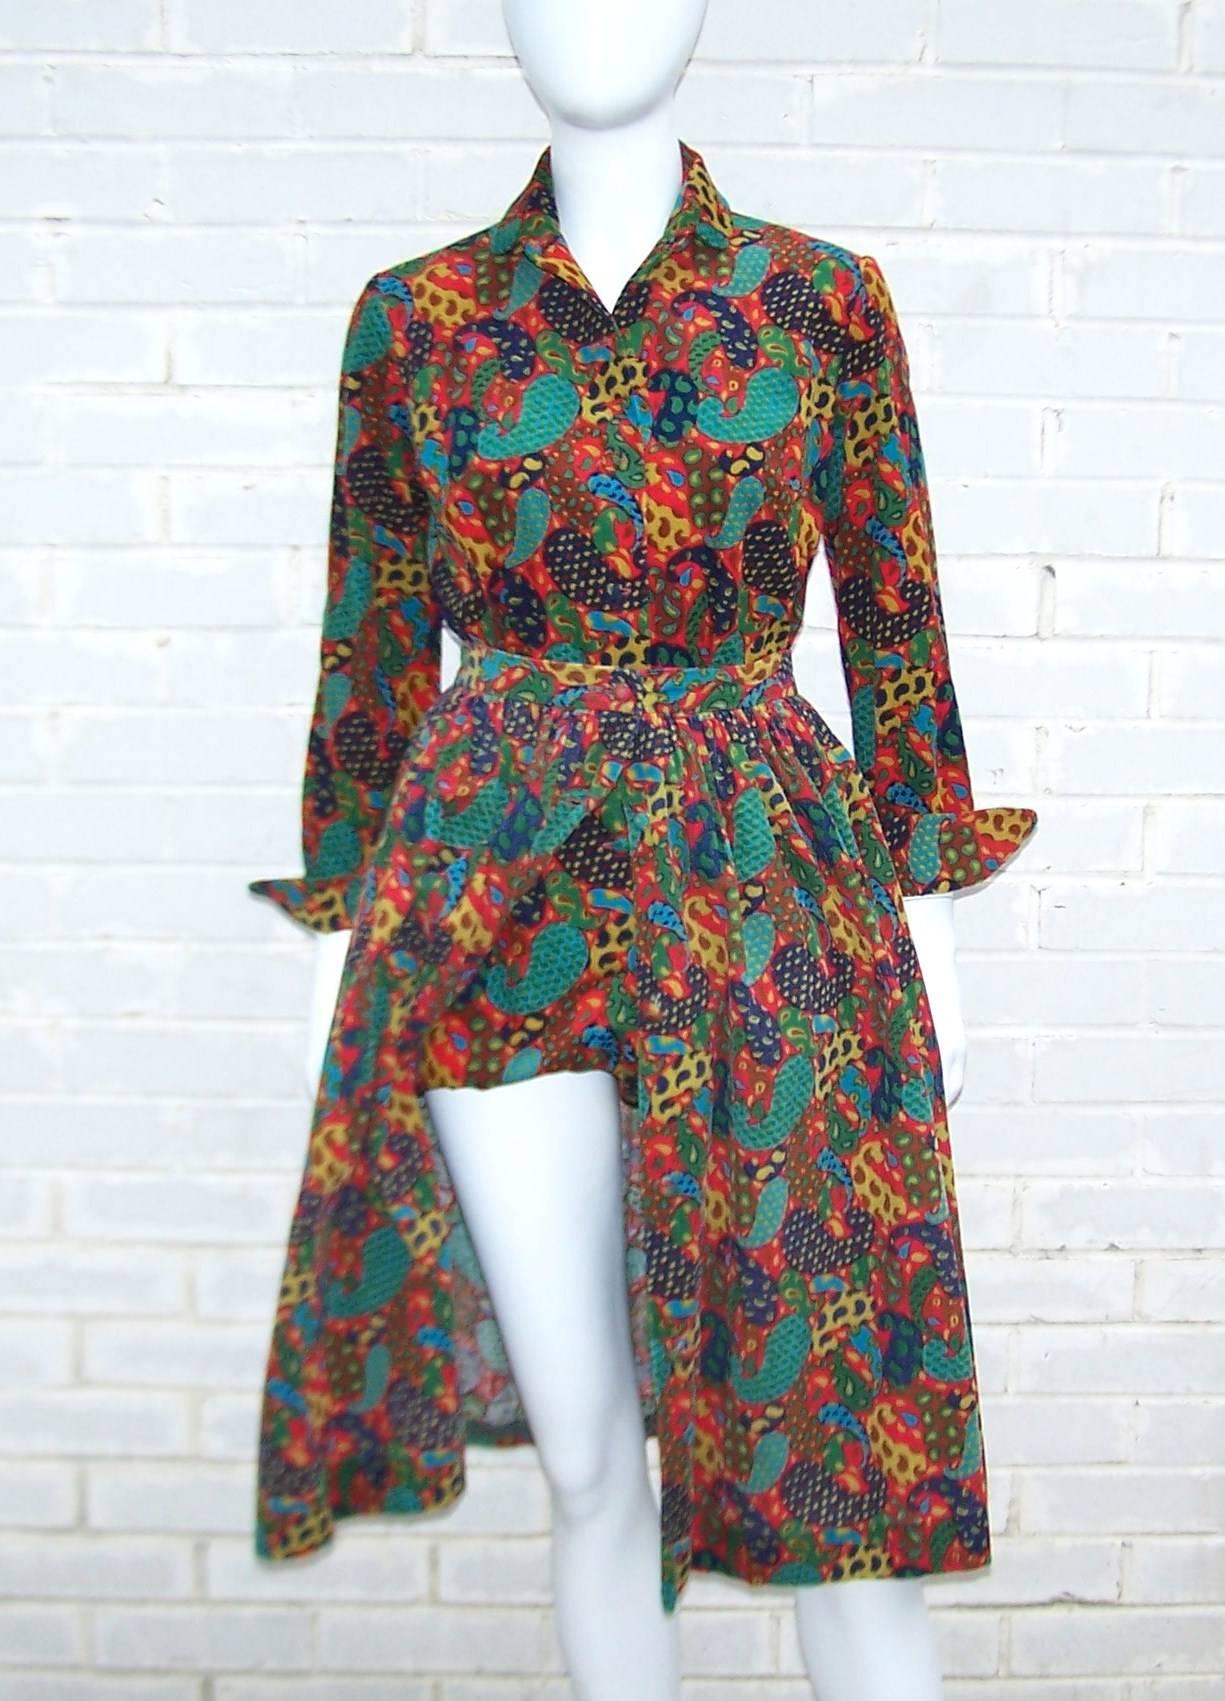 There are so many possibilities with this Anne Fogarty 1970's lightweight corduroy ensemble.  Start with the adorable romper which buttons at the front with a Peter Pan collar and elasticized legs to create bloomers on the bottom and then add a